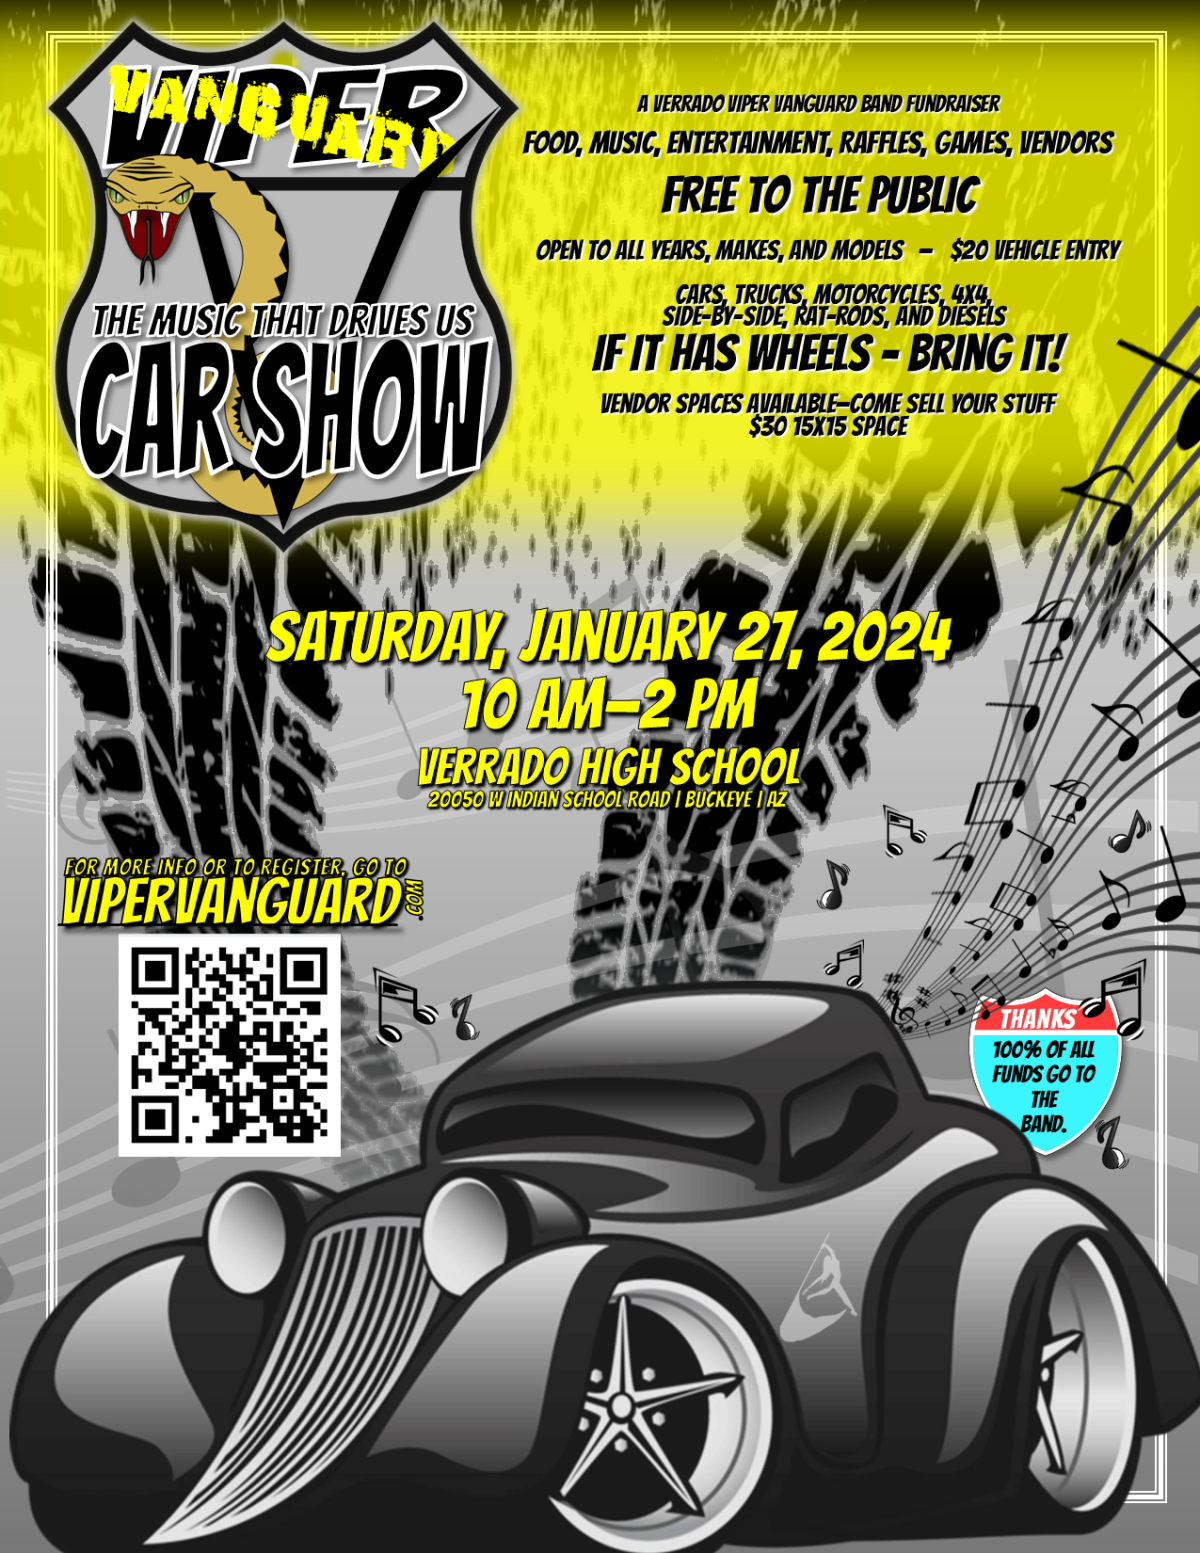 The Music That Drives Us Car Show